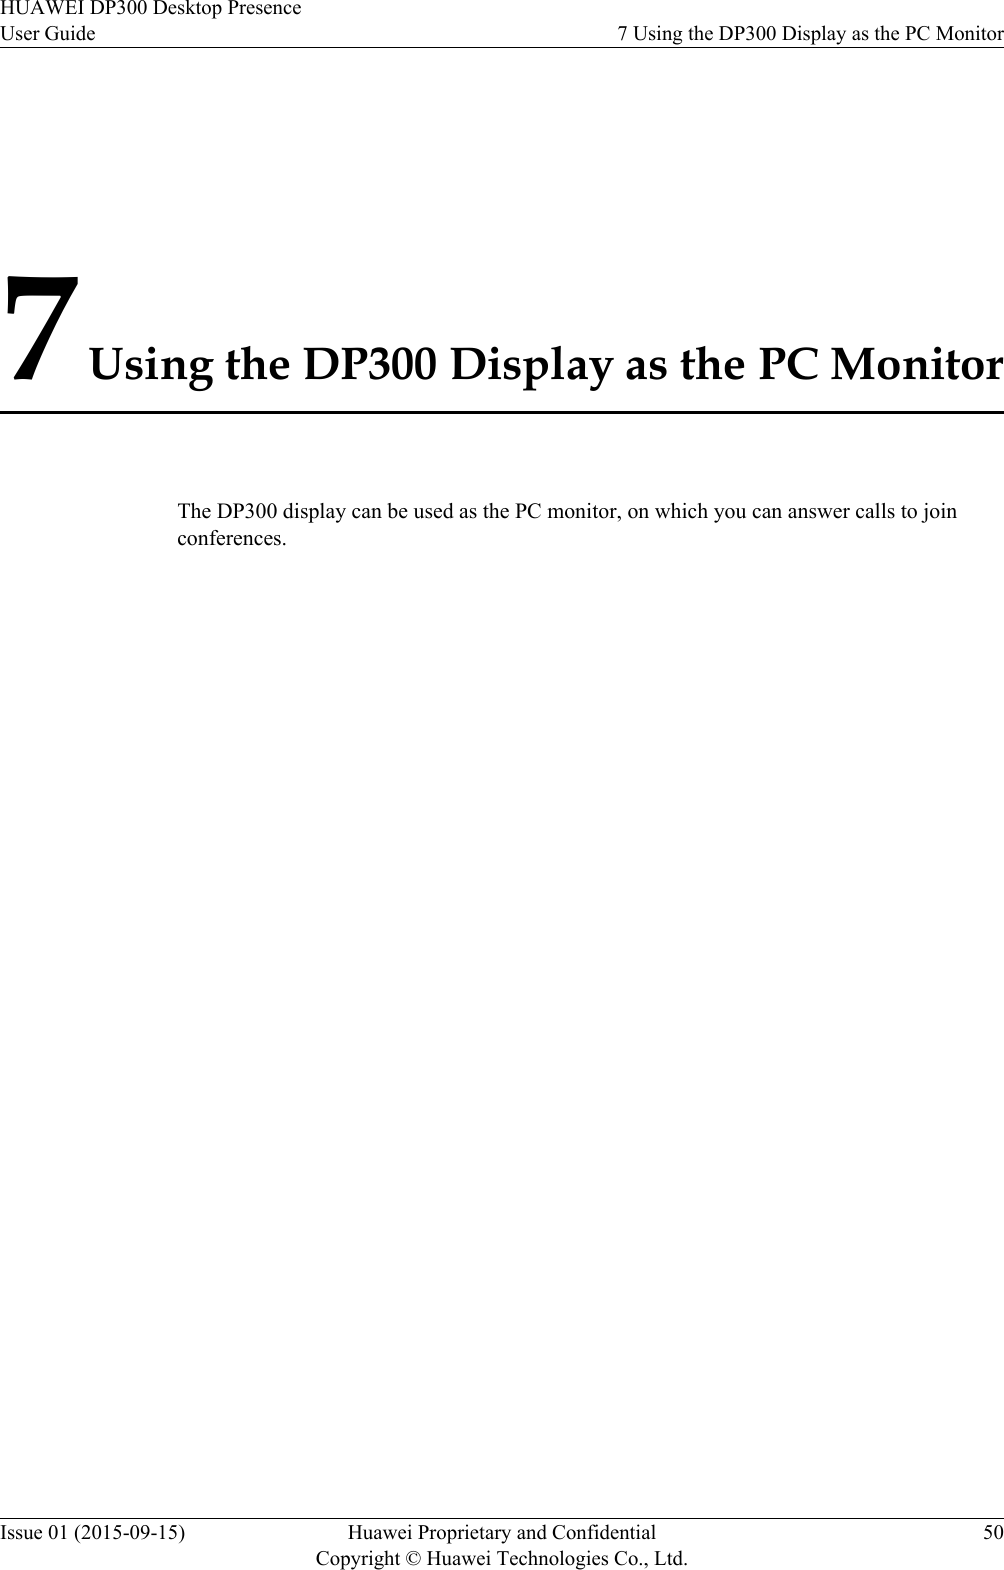 7 Using the DP300 Display as the PC MonitorThe DP300 display can be used as the PC monitor, on which you can answer calls to joinconferences.HUAWEI DP300 Desktop PresenceUser Guide 7 Using the DP300 Display as the PC MonitorIssue 01 (2015-09-15) Huawei Proprietary and ConfidentialCopyright © Huawei Technologies Co., Ltd.50